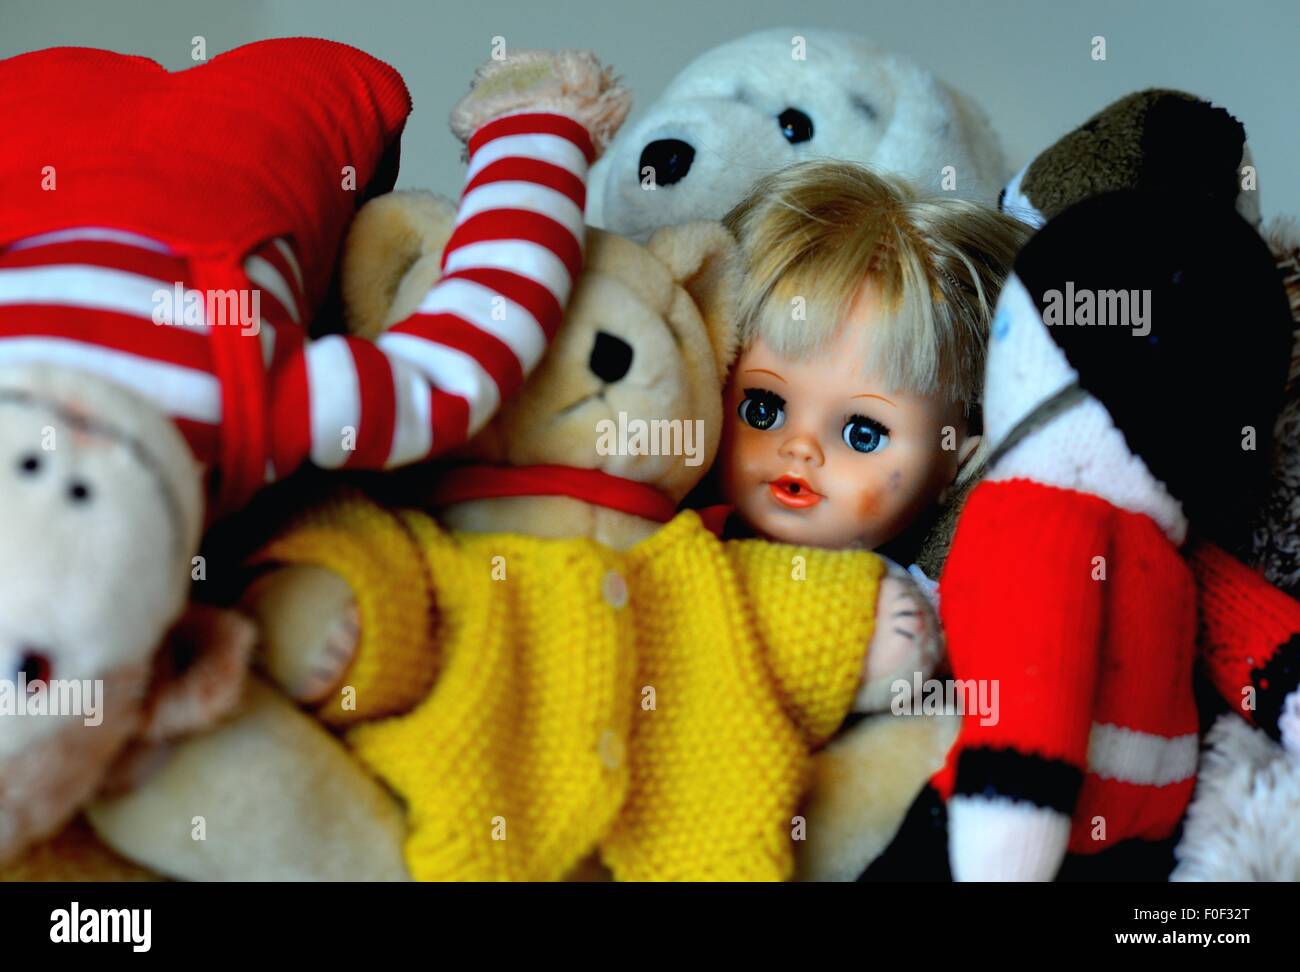 Face of a child's doll in a pile of soft toys Stock Photo